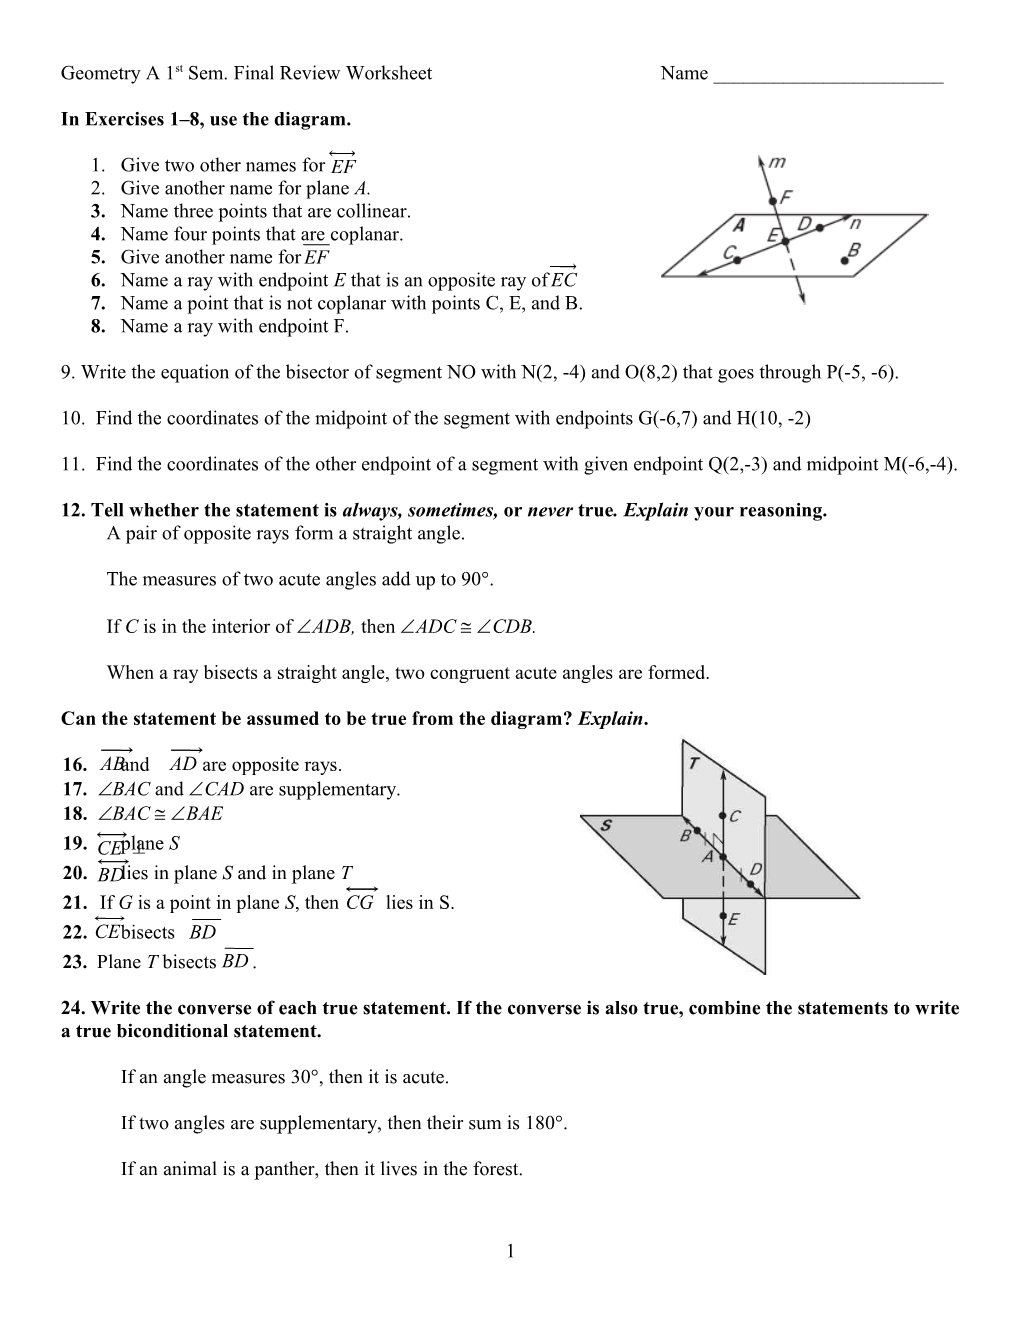 Geometry a 1St Sem. Final Review Worksheet Name ______